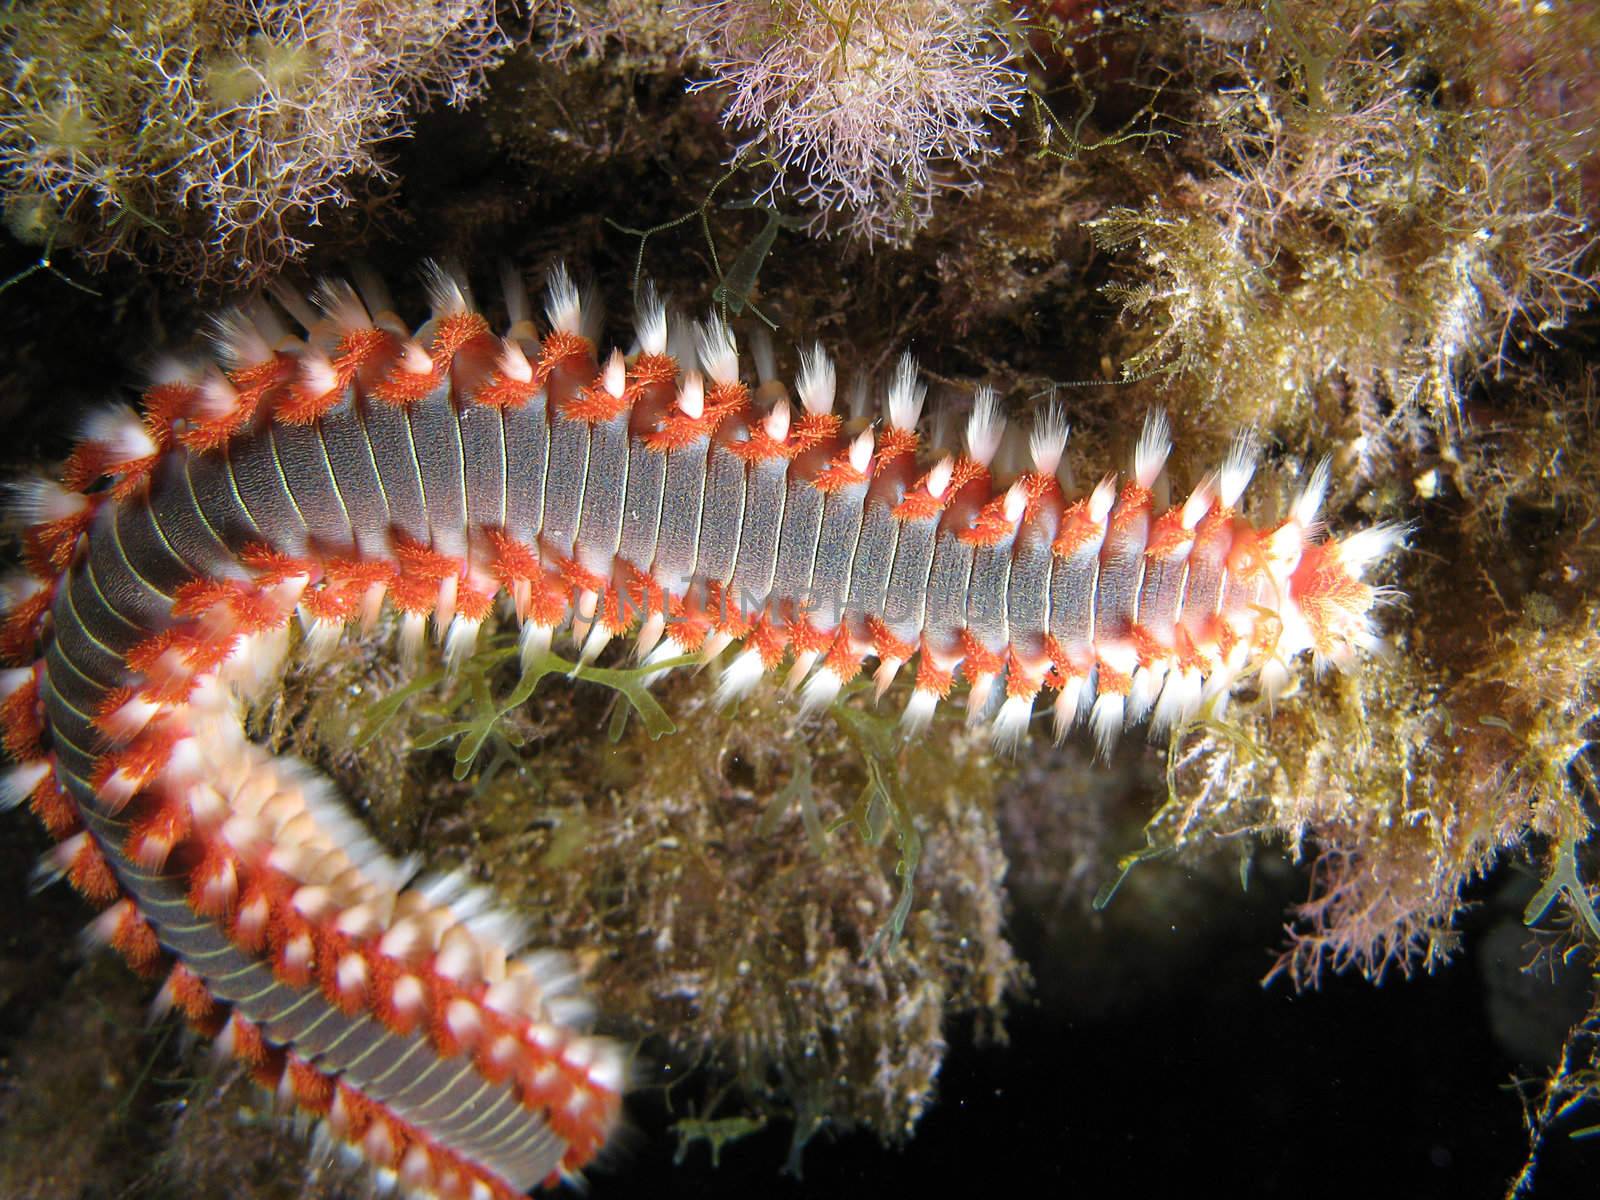 "Hermodice Carunculata" also known as Fire Worm. Shotted undersea in the wild.